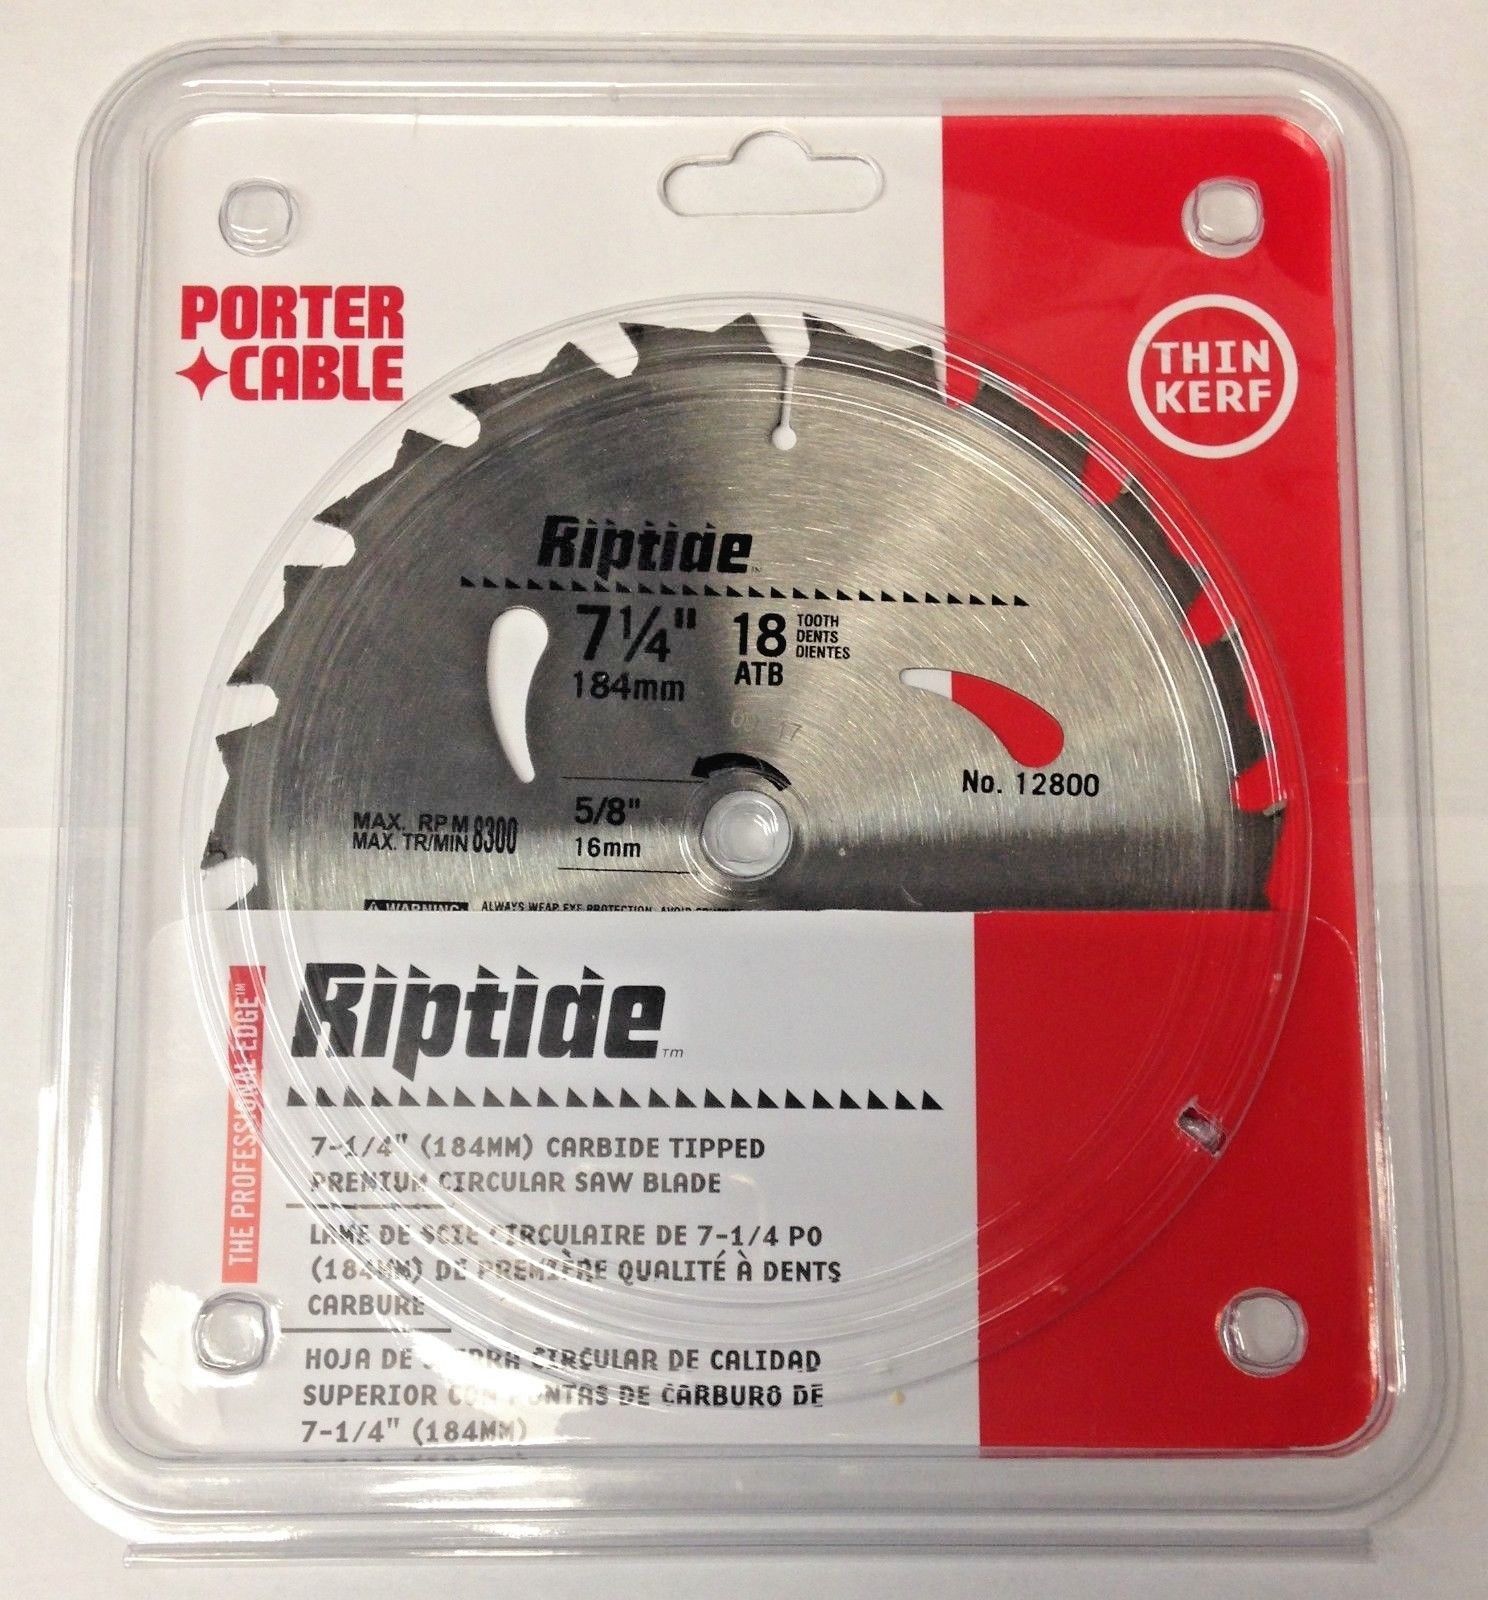 Porter Cable 12800 7-1/4" x 18 Tooth ATB Thin Kerf Riptide Circular Saw Blade